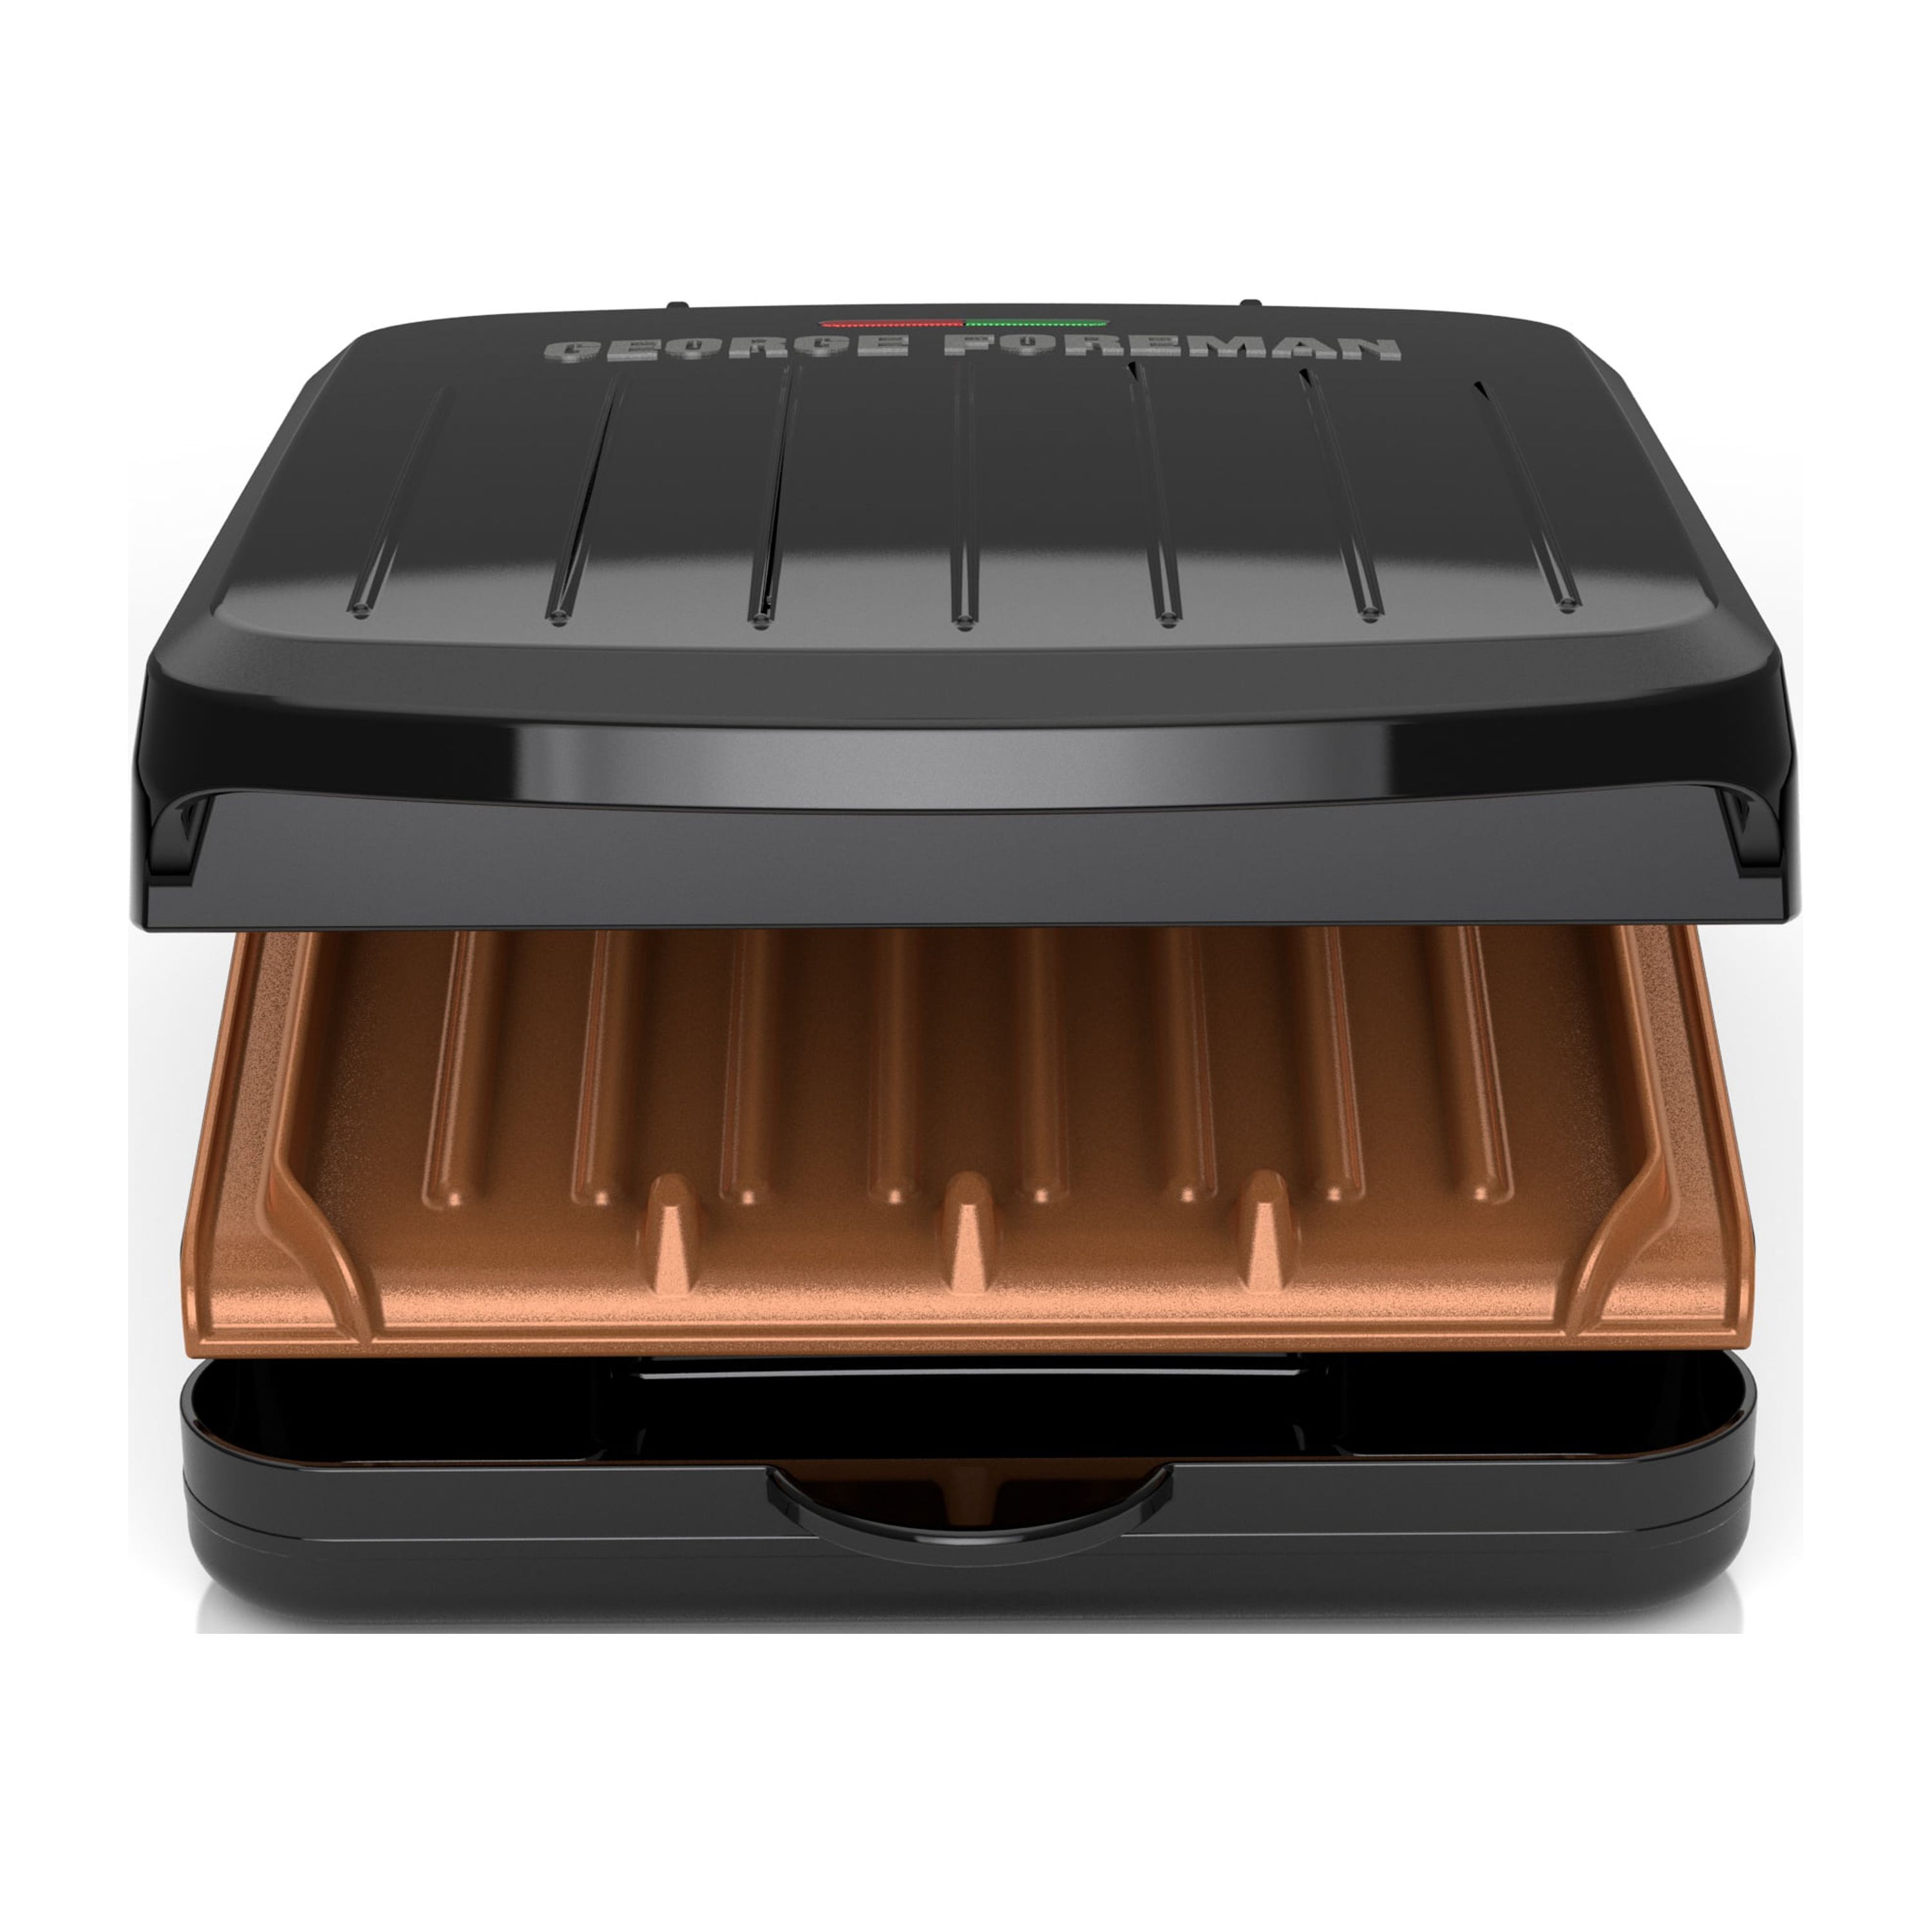 George Foreman Electric Indoor Grill and Panini Press, Black with Copper Plates, Serves 2, Classic Plate, GRS040-Series - image 2 of 9